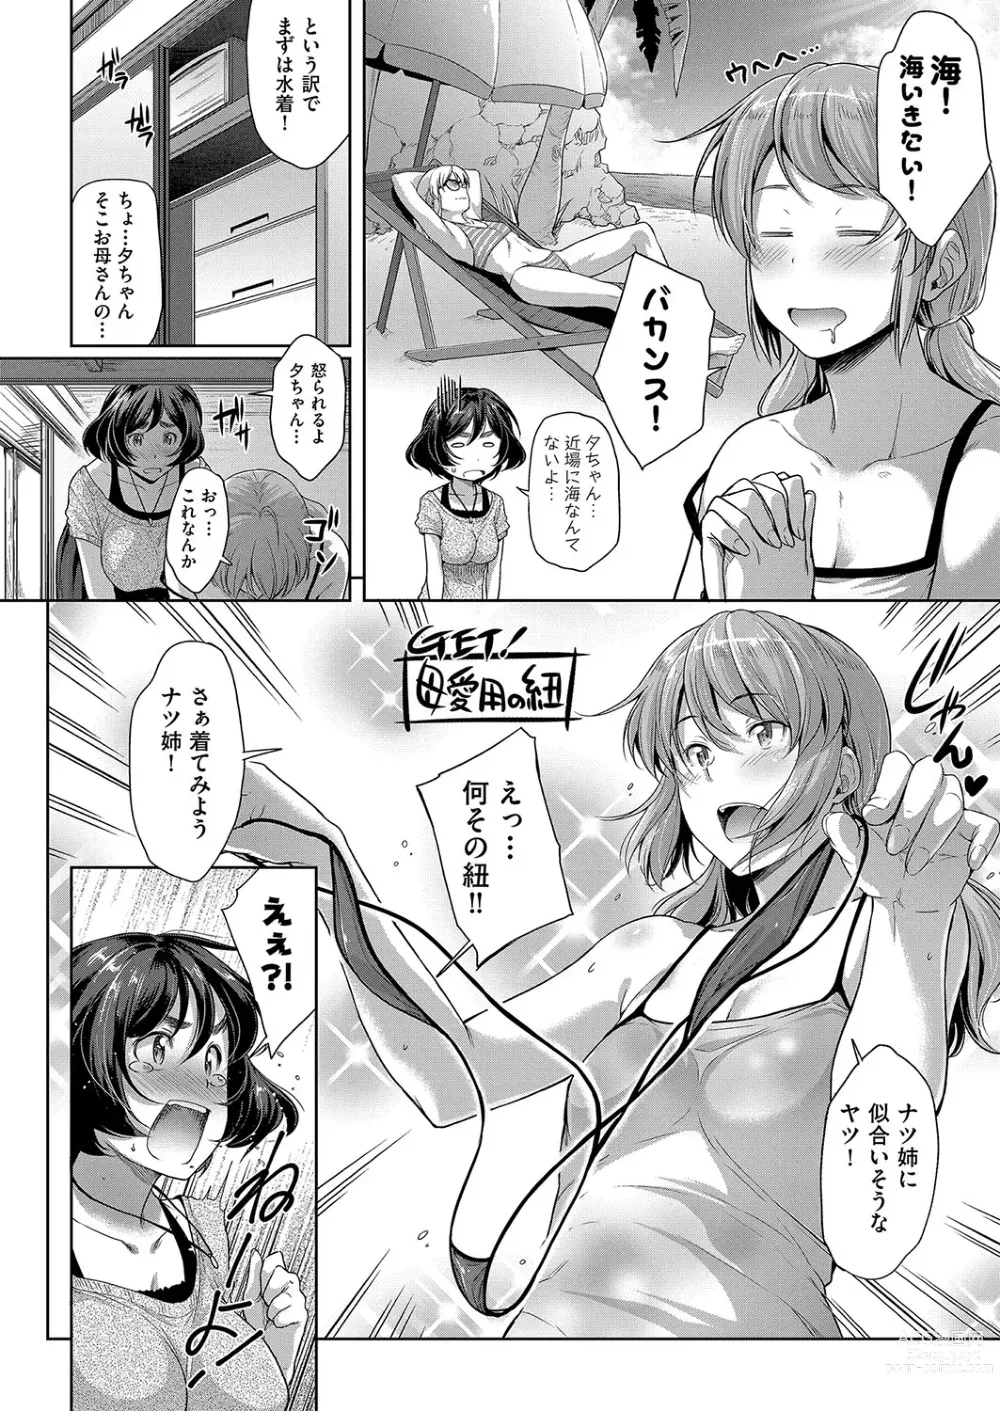 Page 27 of manga Chichi to Megane to Etc - Boobs, glasses and etc...